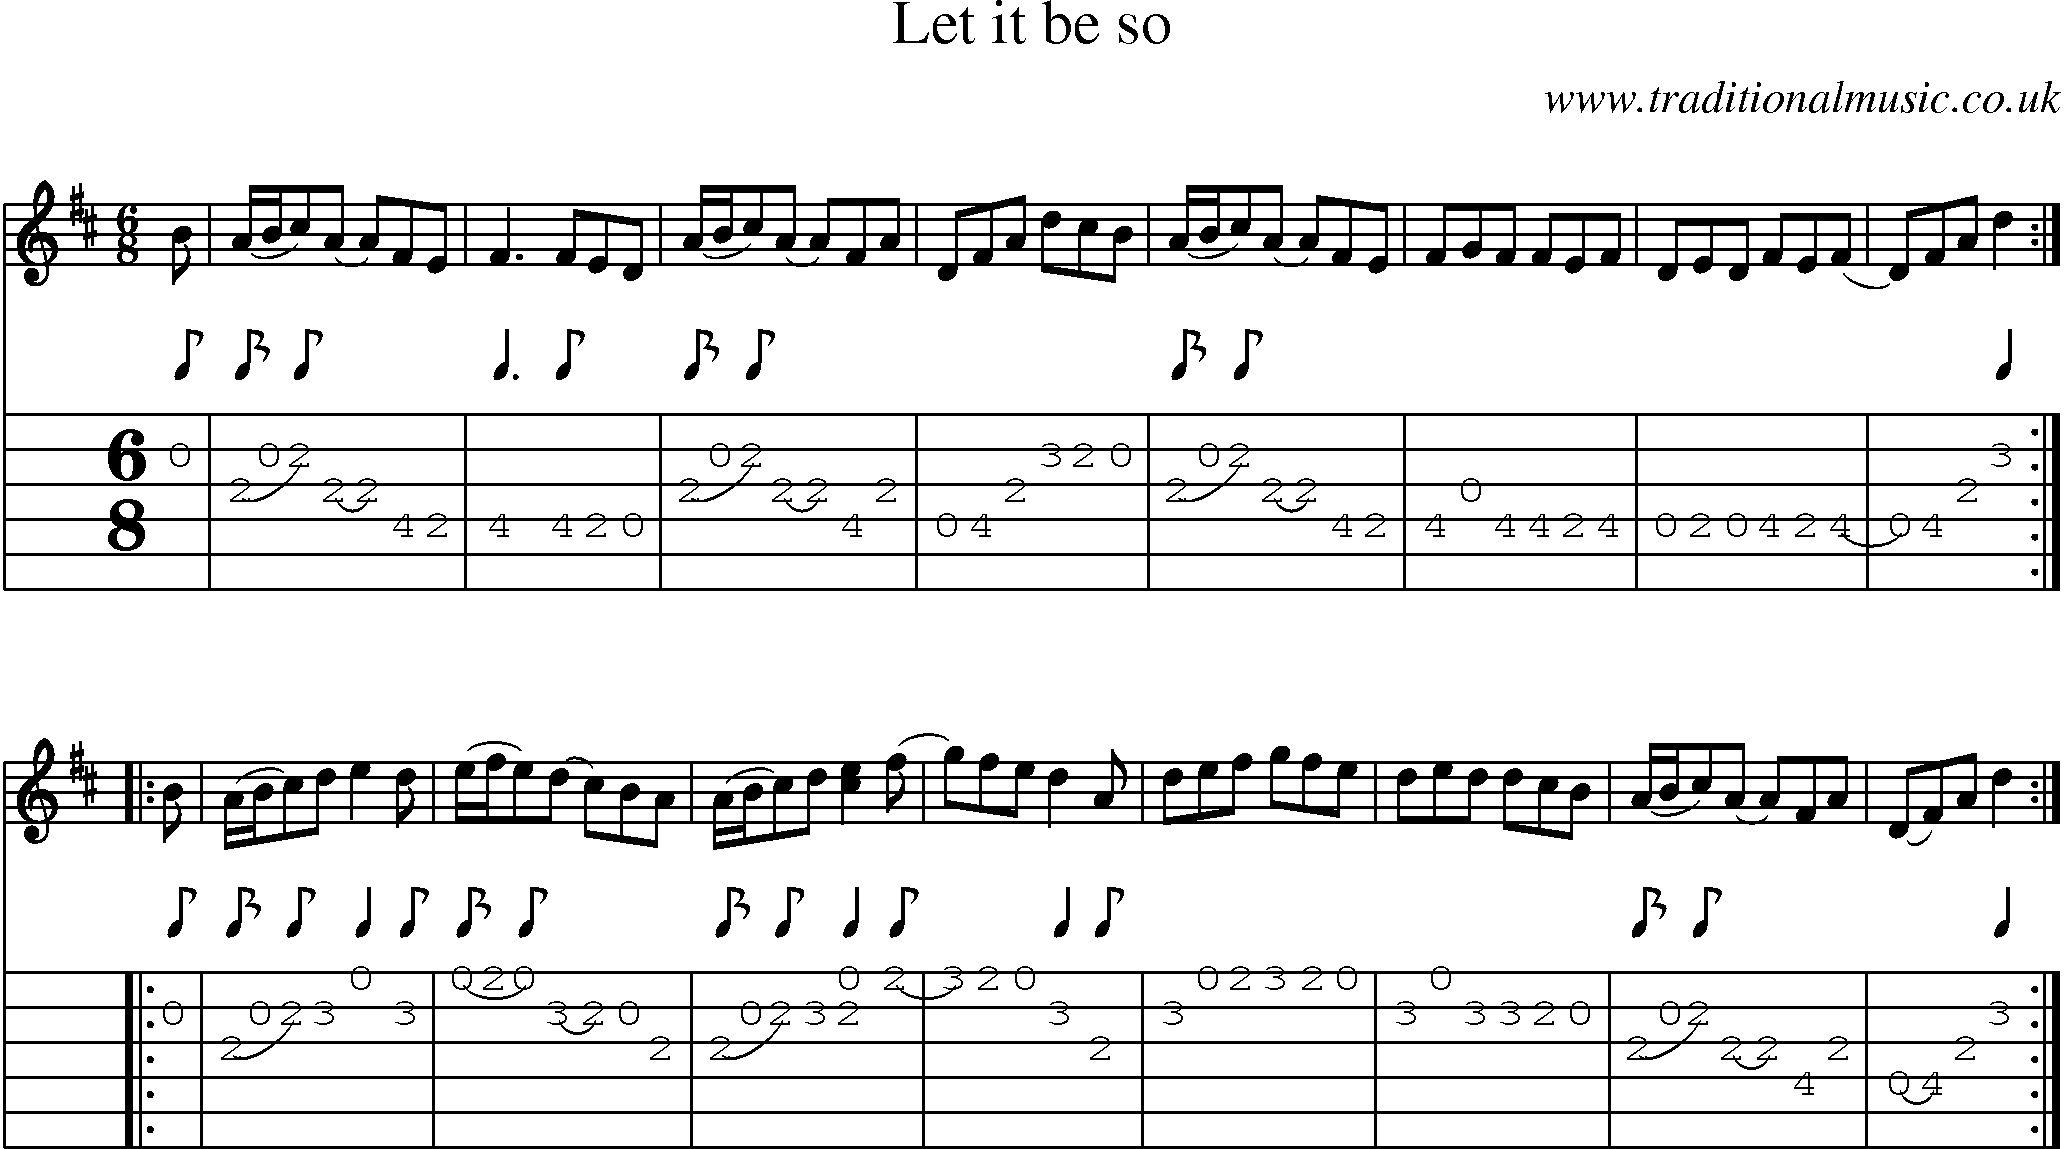 Music Score and Guitar Tabs for Let It Be So